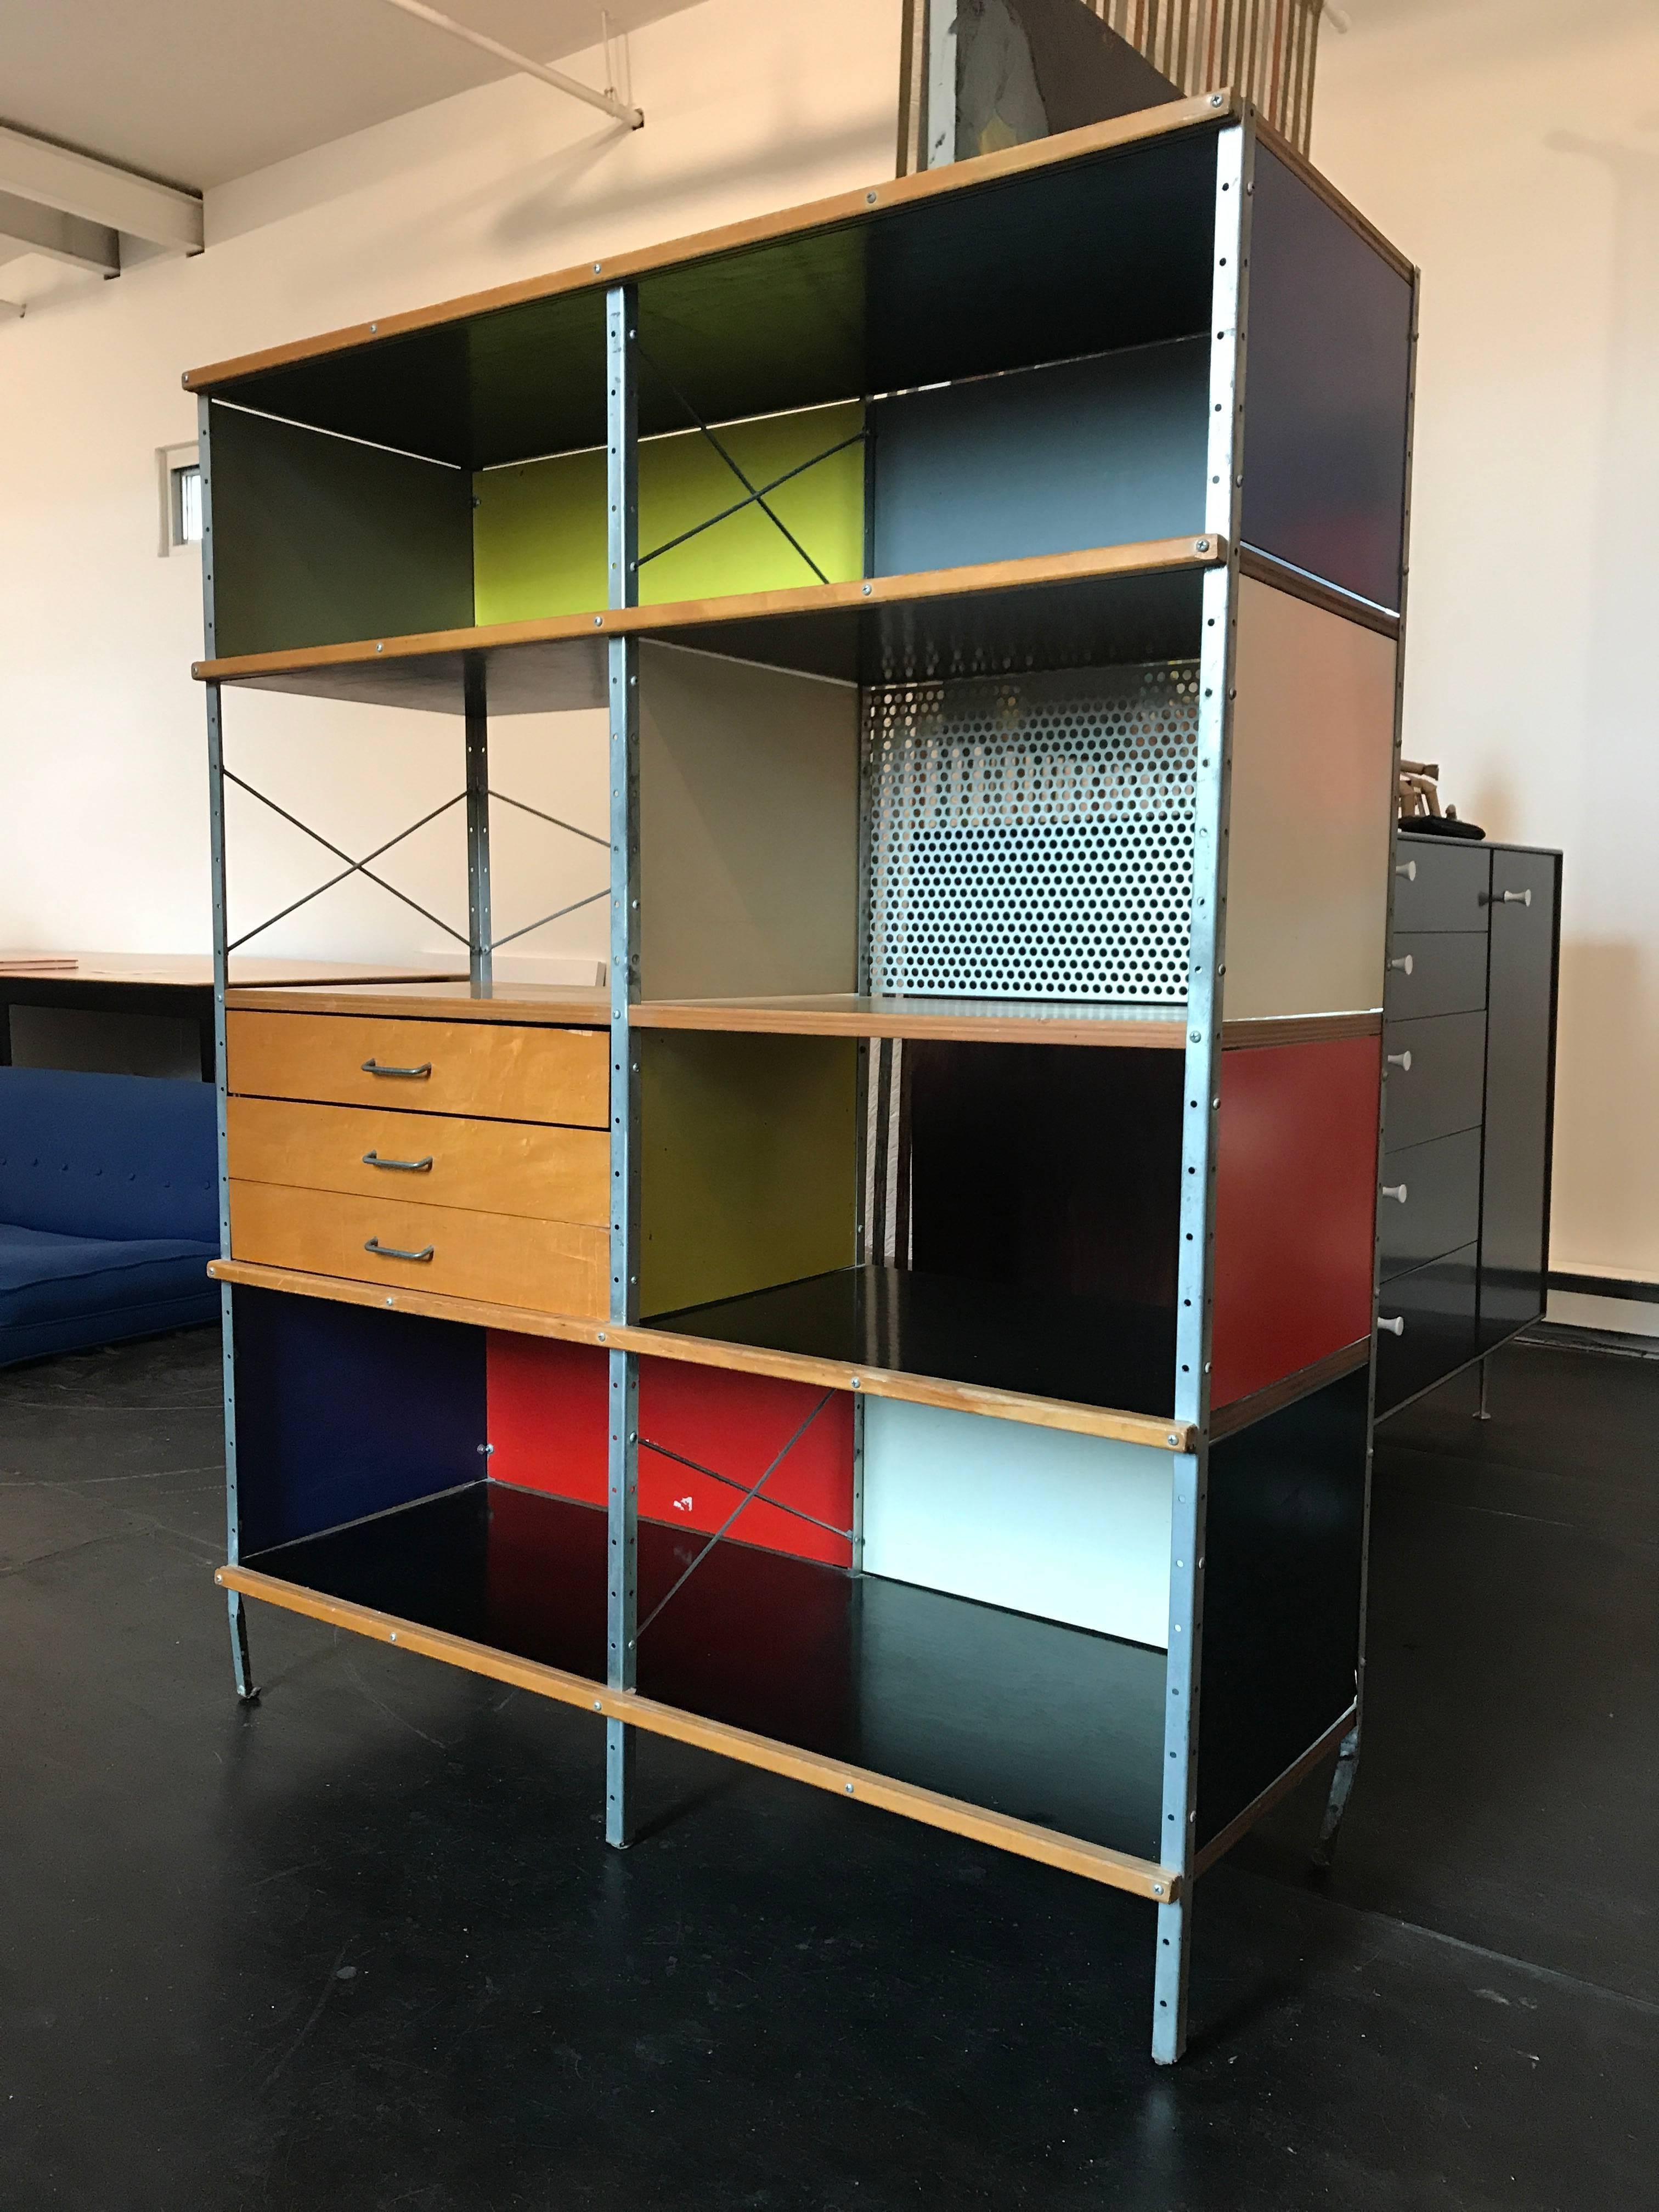 This rare storage unit by Charles and Ray Eames was bought in Detroit Michigan in 1950, almost certainly from Alexander Girard. We acquired the unit from its original owner. 400 series ESUs are exceedingly rare from the original production run